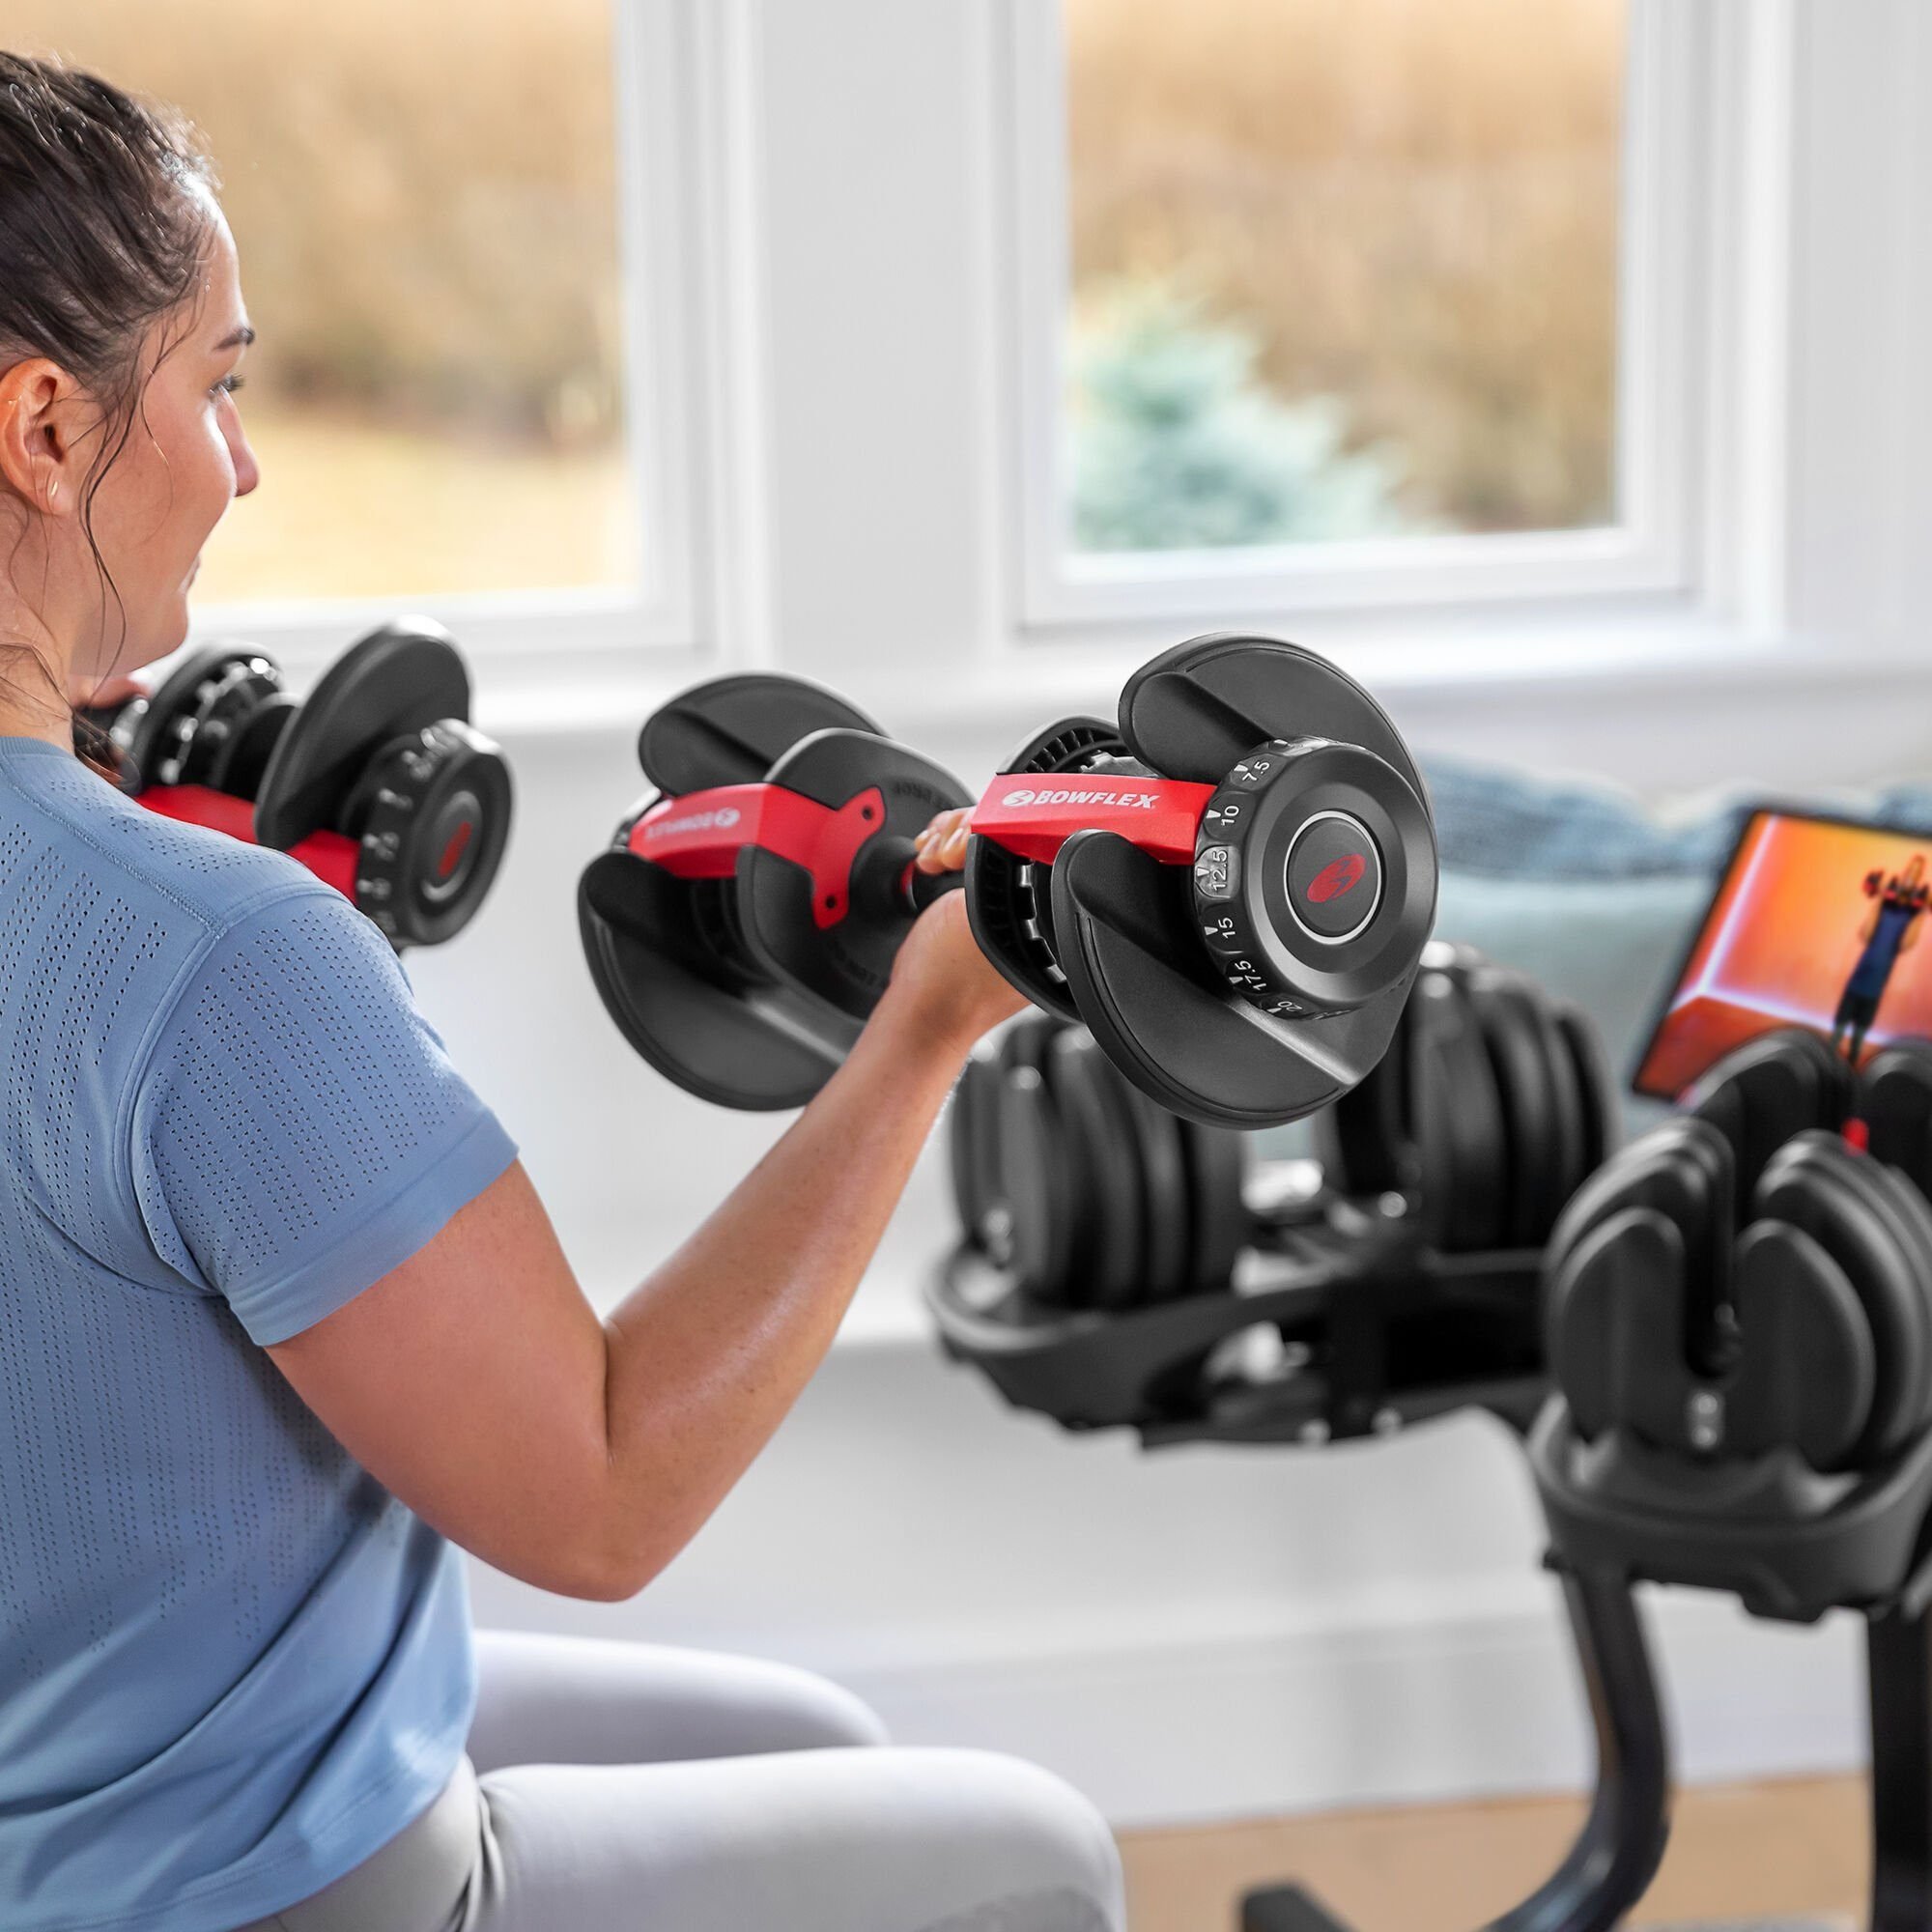 A Trainer Says These Adjustable Dumbbells Are Your “Best Investment”